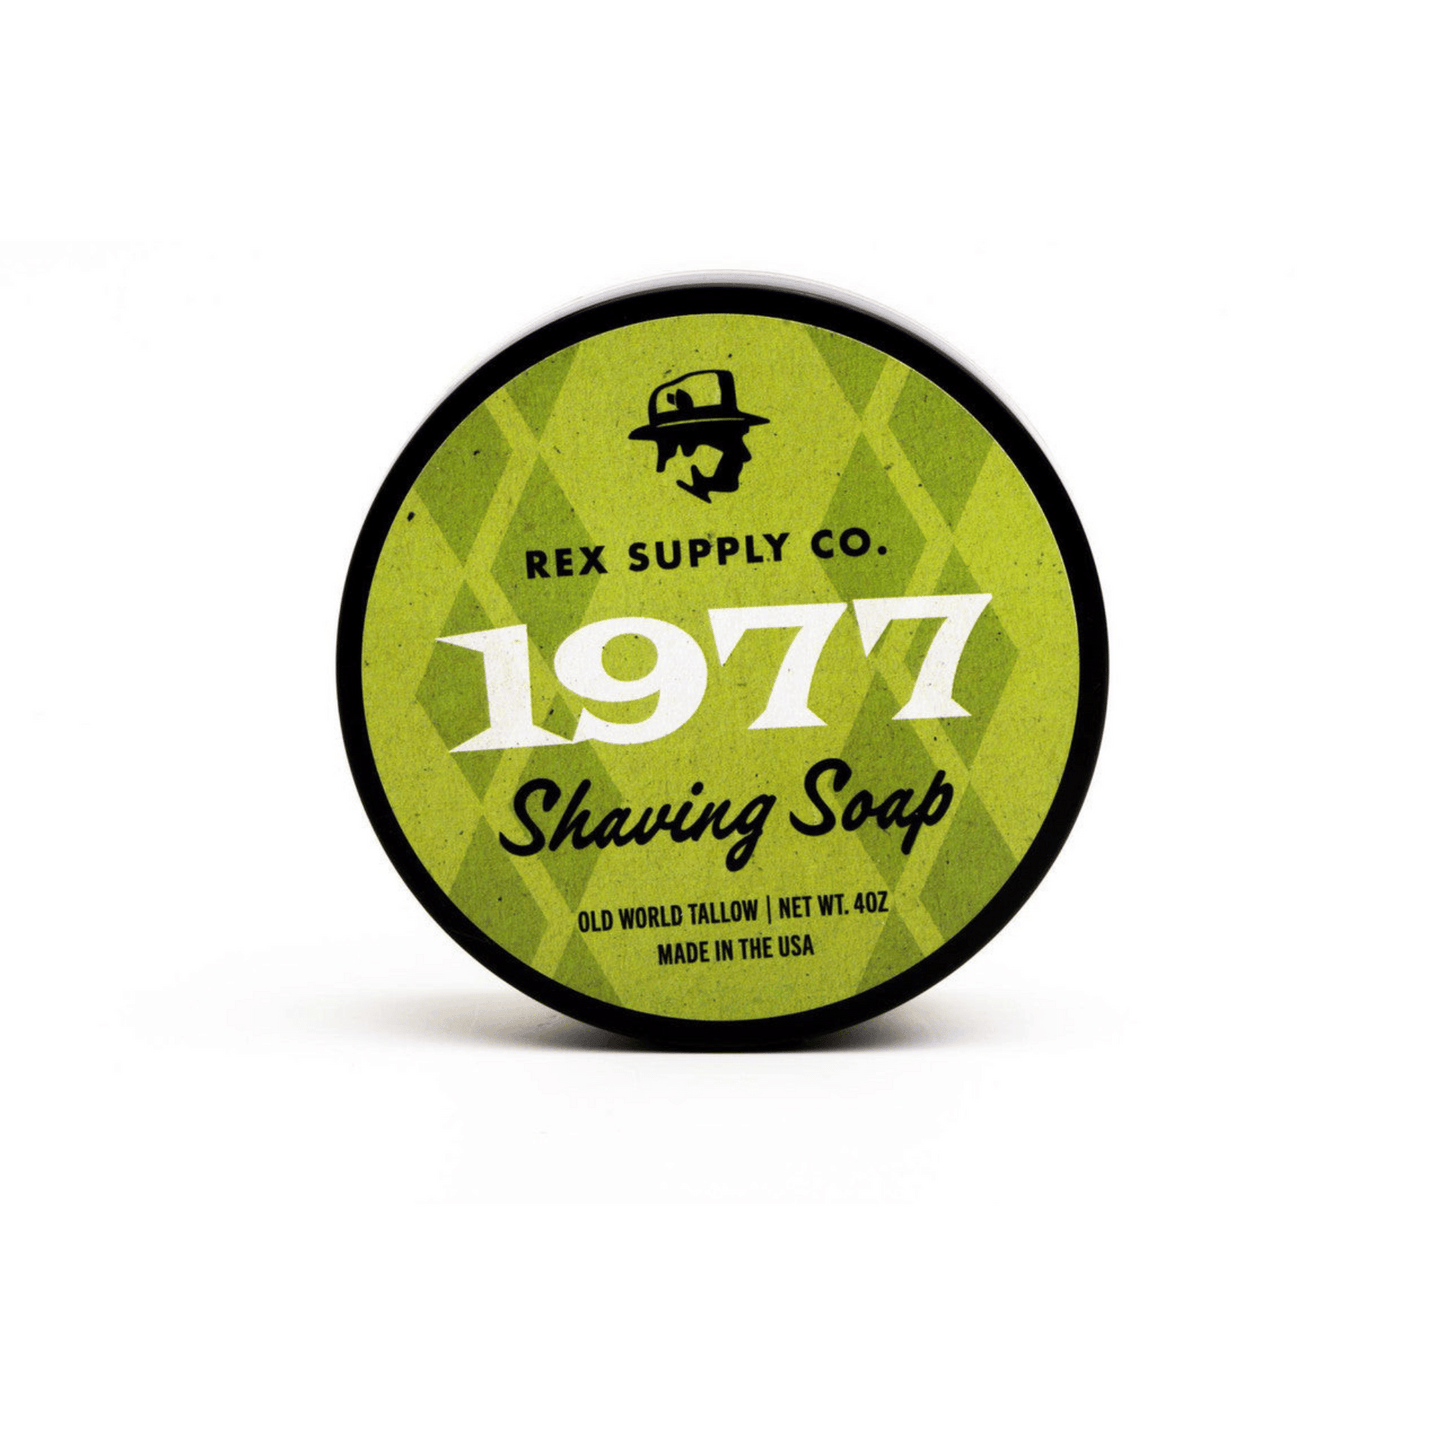 Primary Image of Shaving Soap - 1977